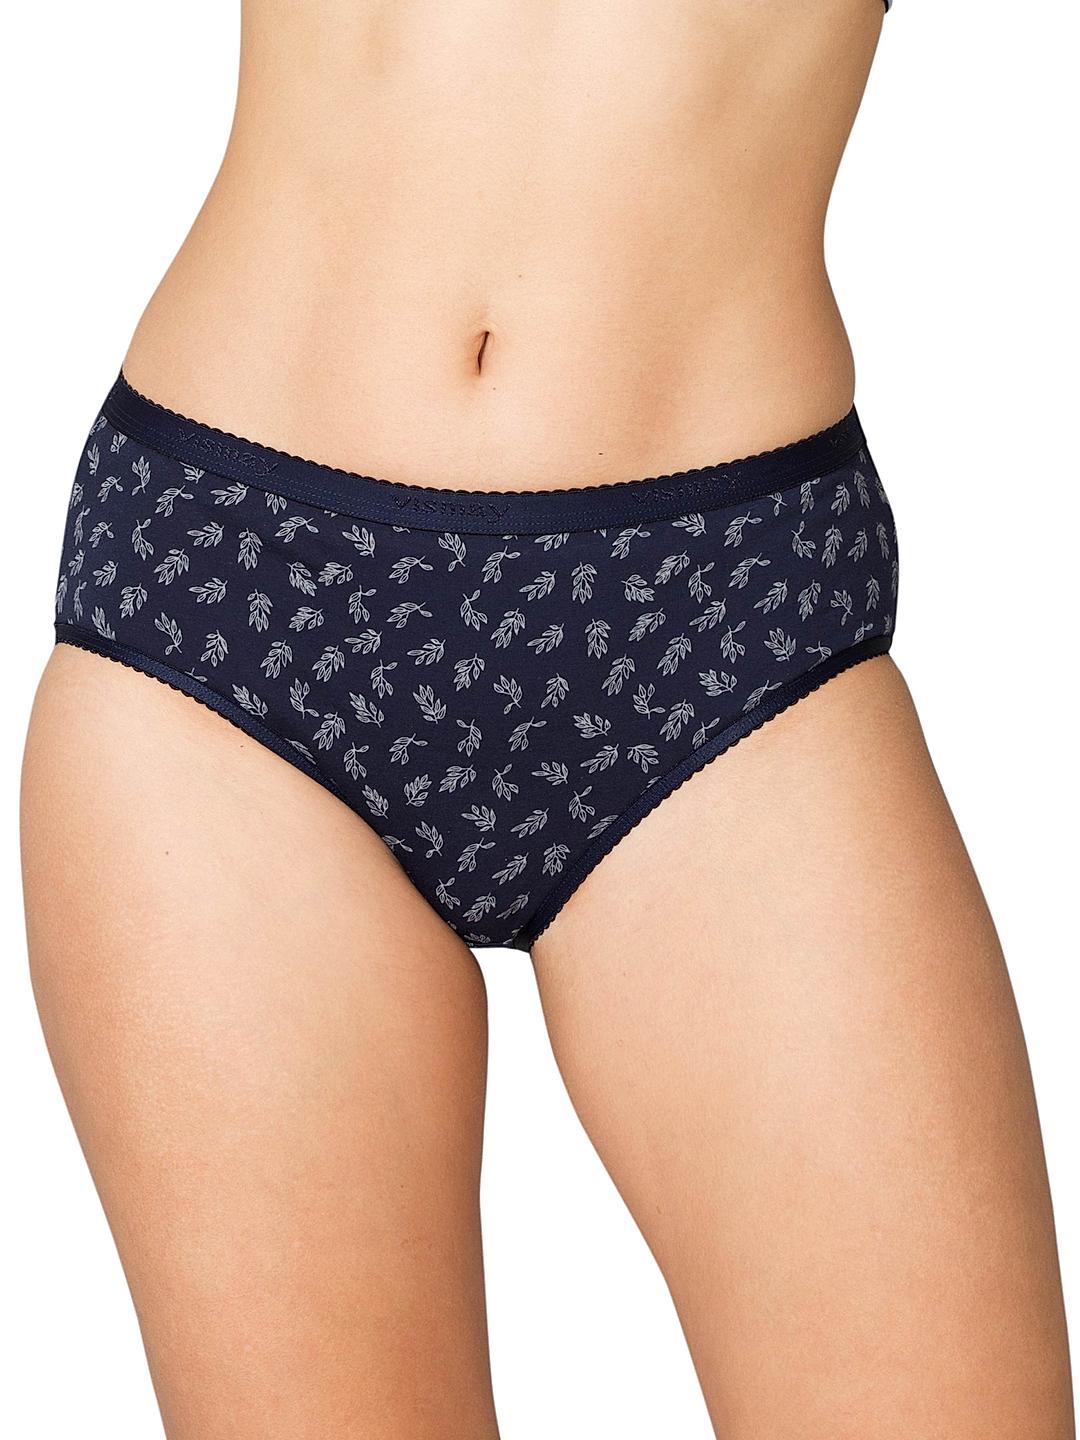 COZY : Stretchable Inner Elastic Hipster Panty